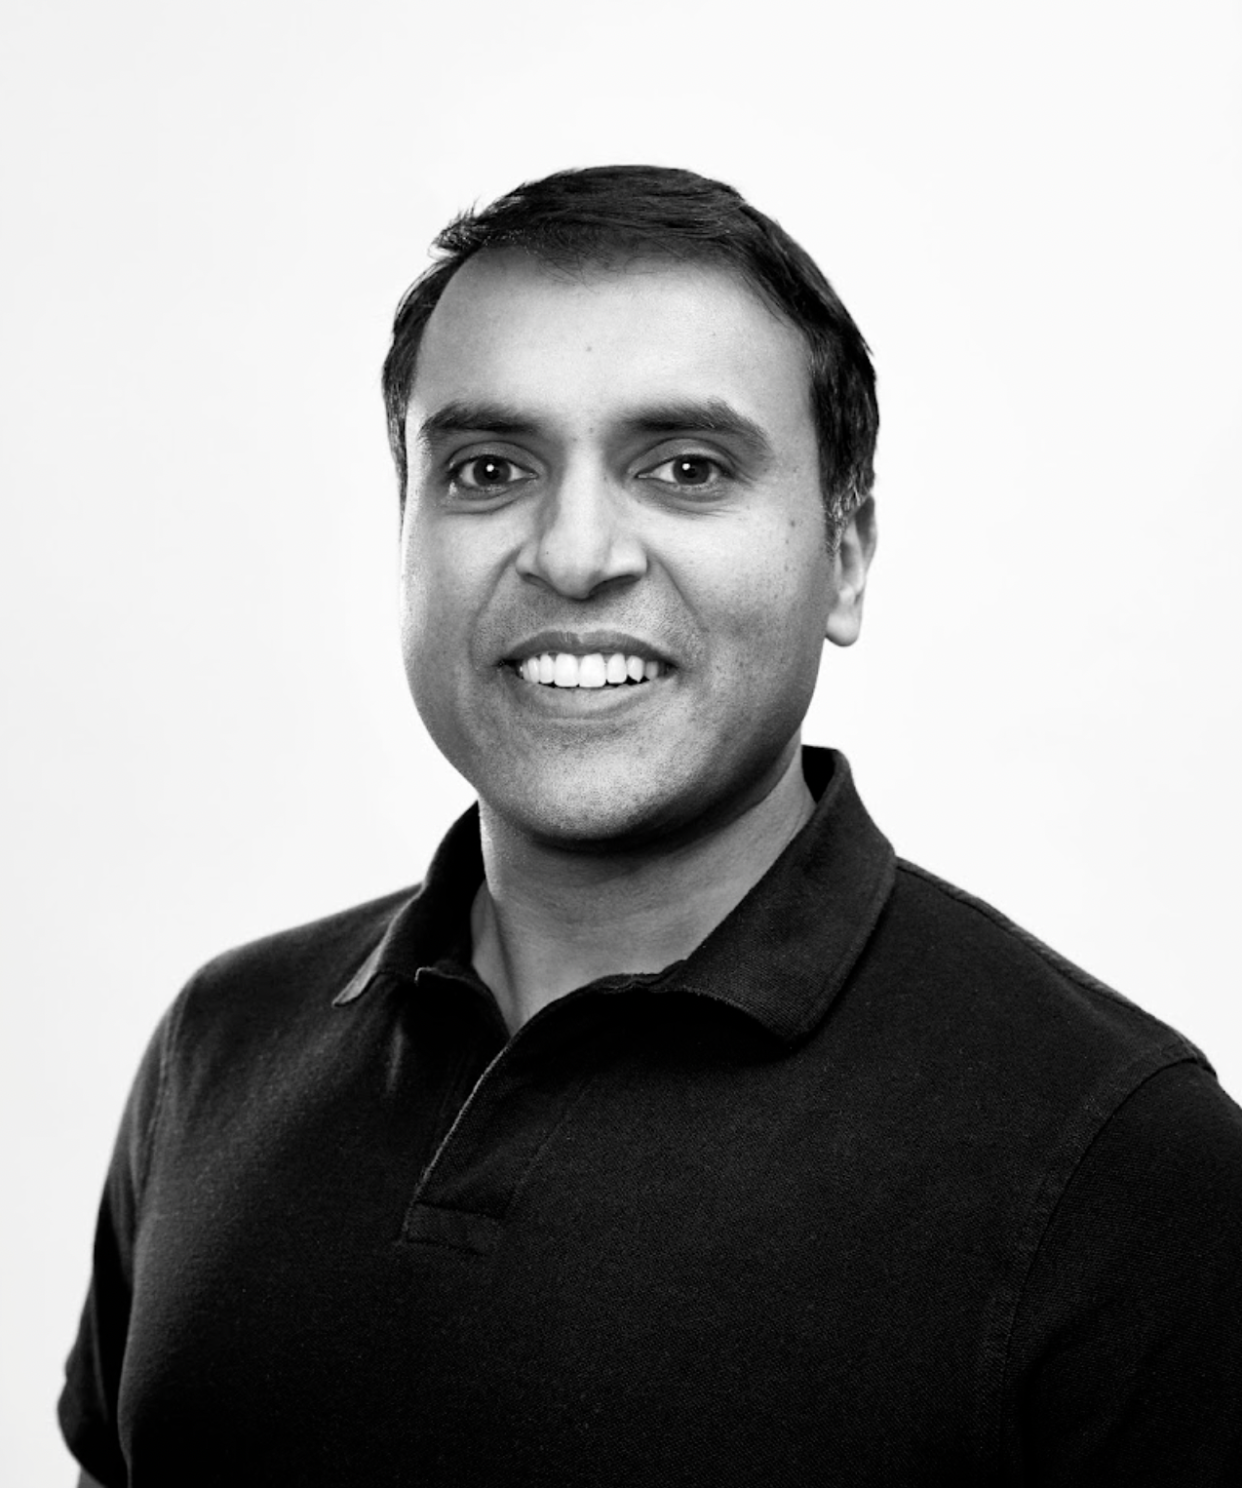 A headshot of WndrCo co-founder Sujay Jaswa, provided by the firm. 